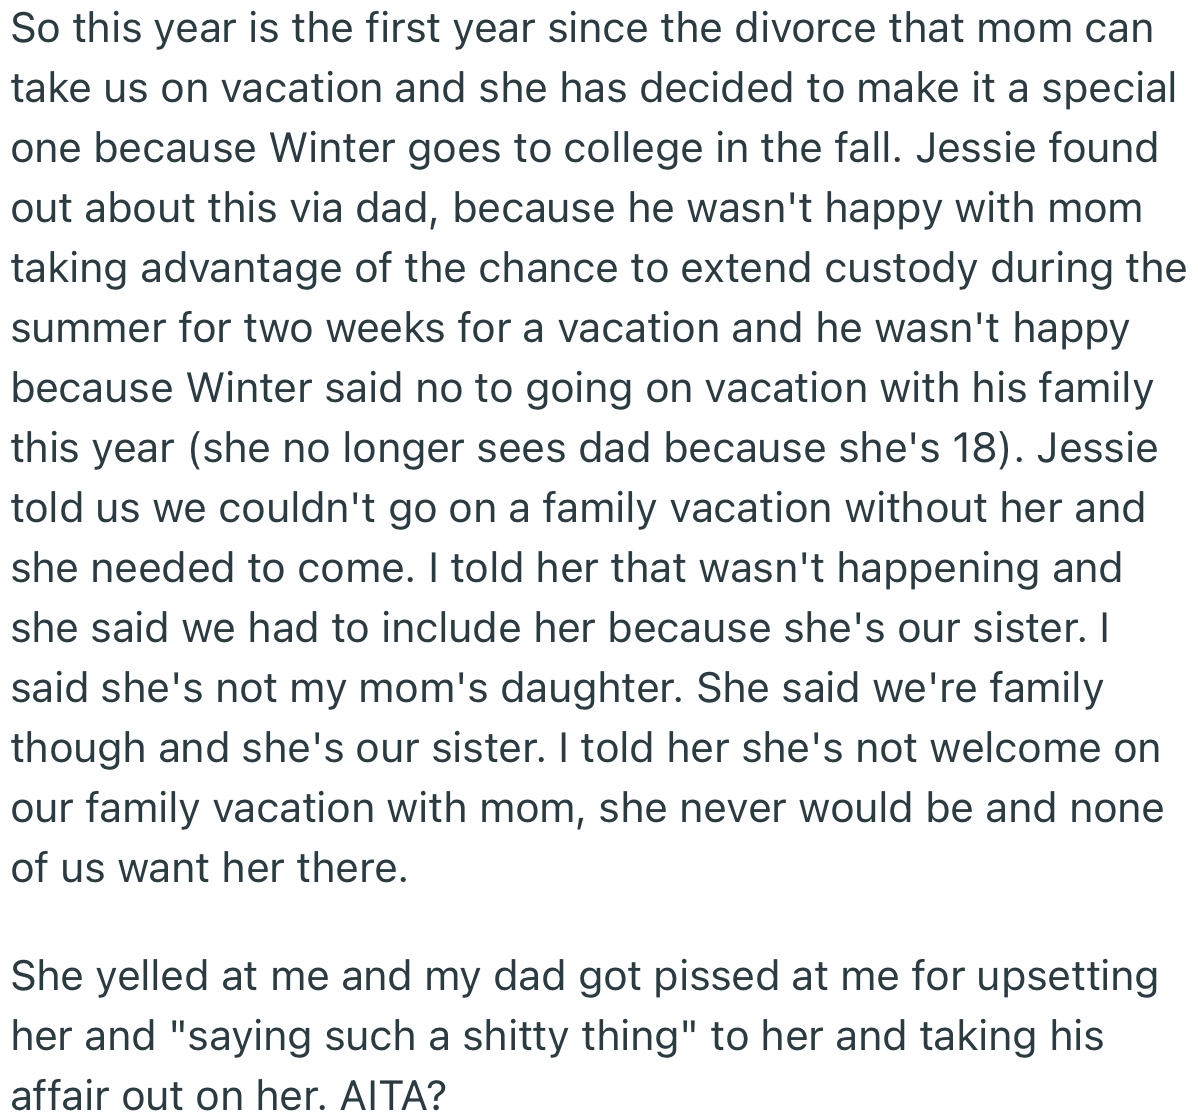 OP’s mom decided to organize a family vacation with her kids. Jessie heard about it and tried to force her way into the plans, but OP put her in her place